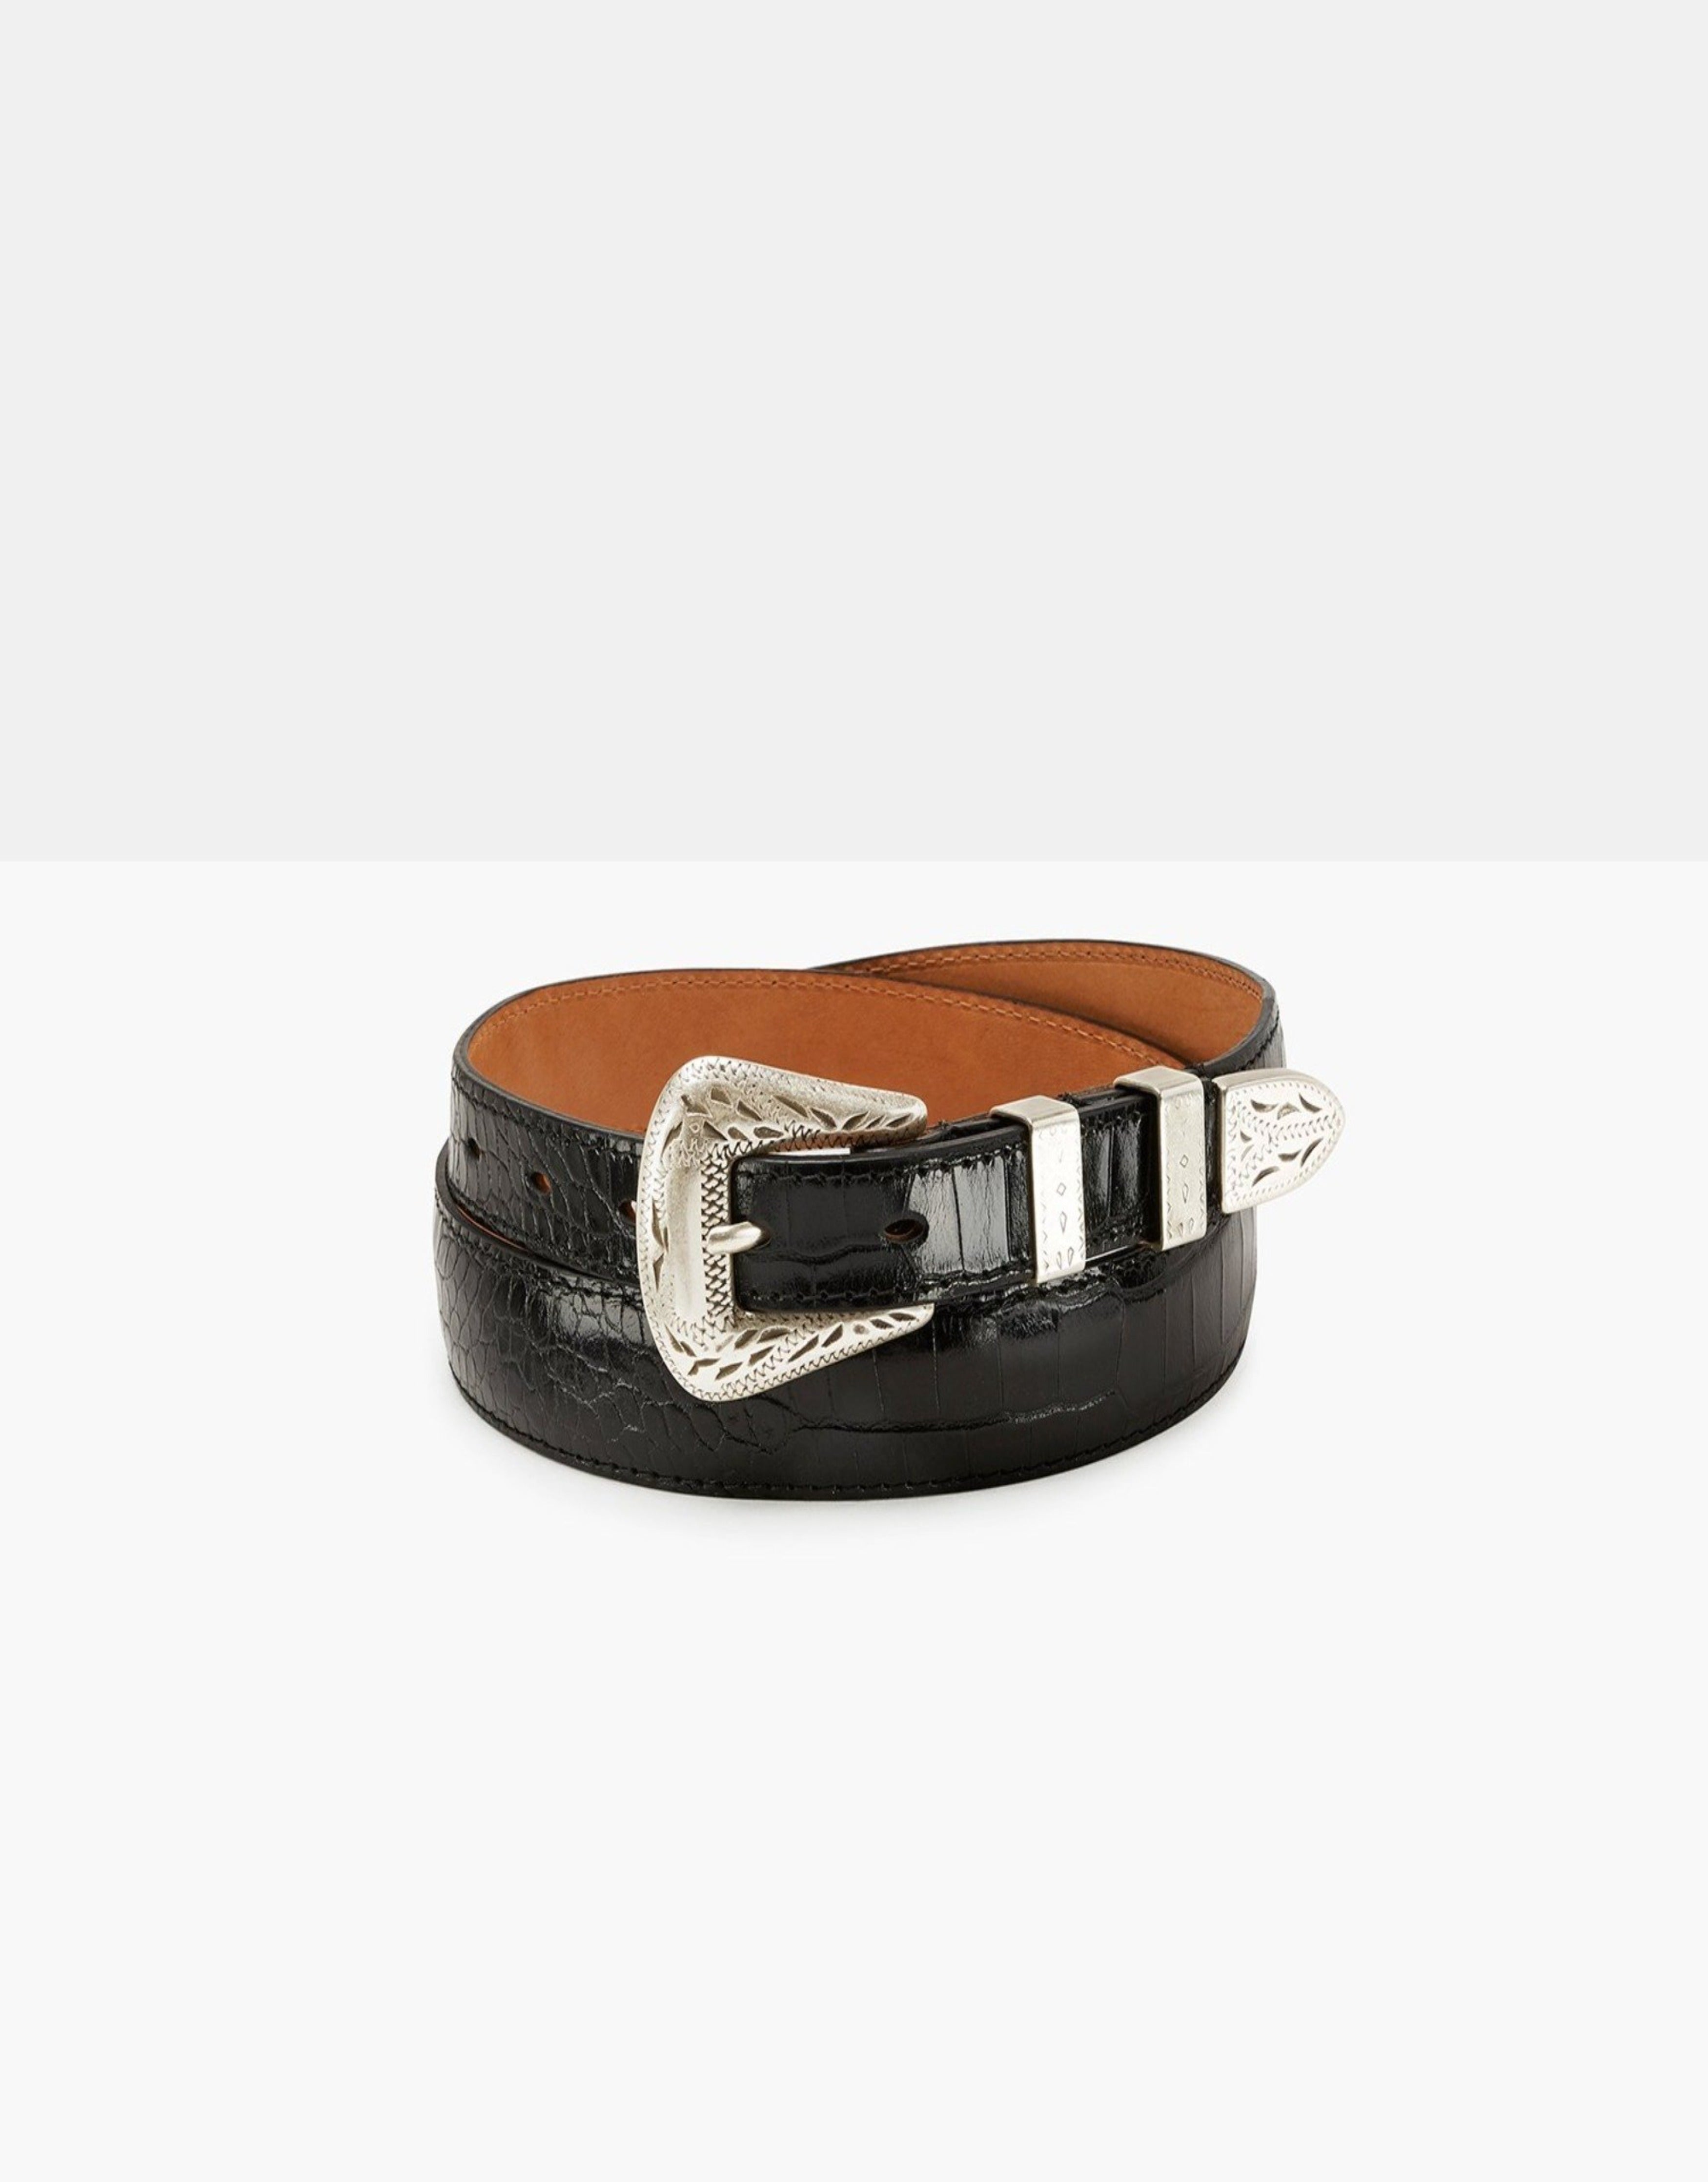 RM Williams Crocodile Brown Leather Belt EU 40, Brown, 40 at  Men's  Clothing store